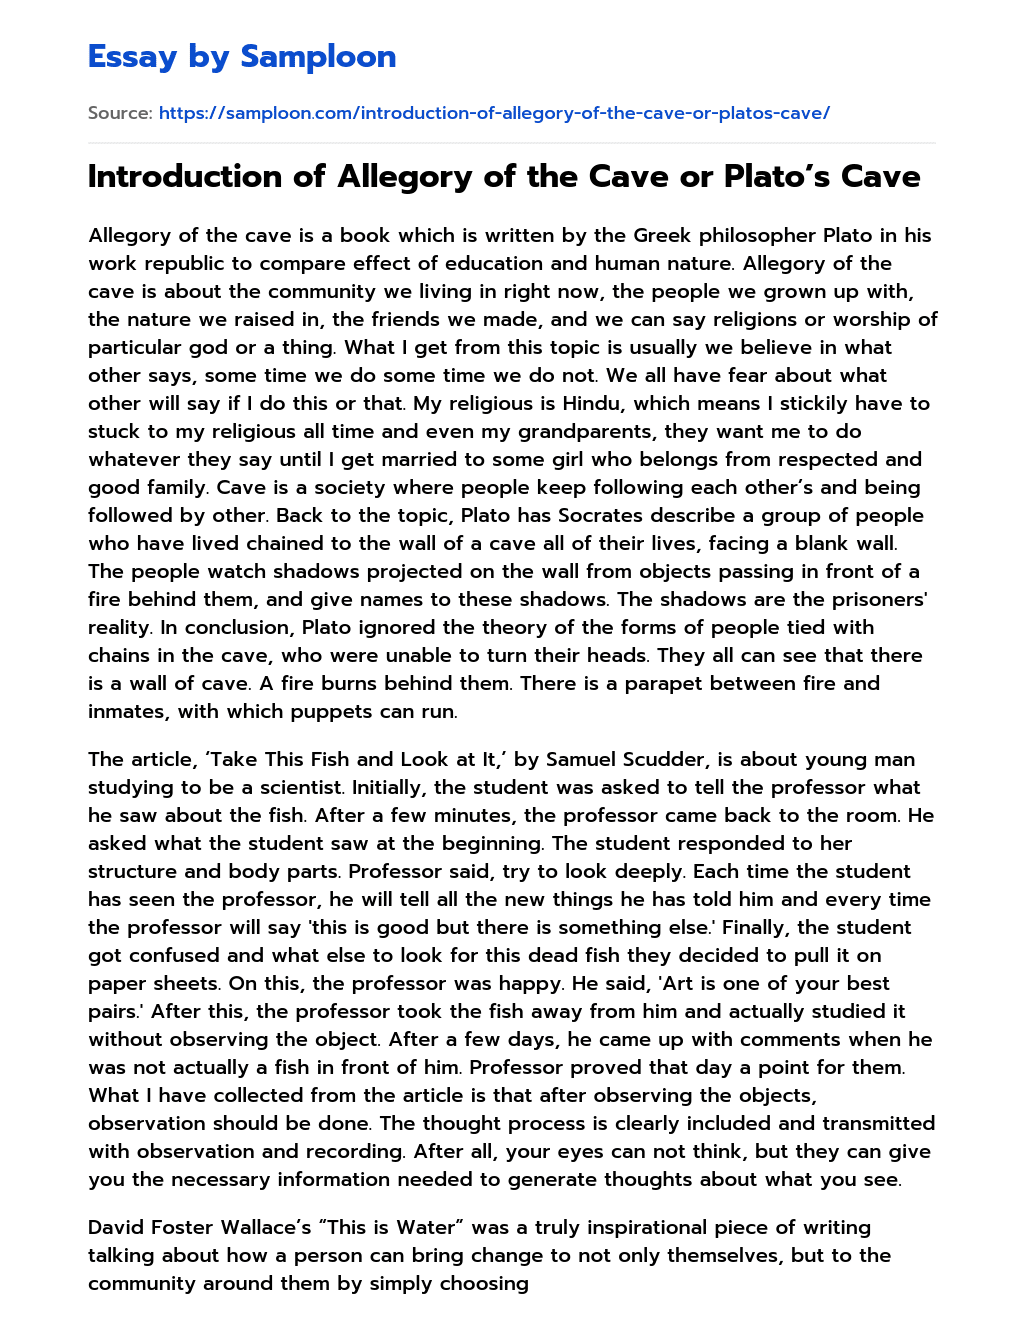 Introduction of Allegory of the Cave or Plato’s Cave essay